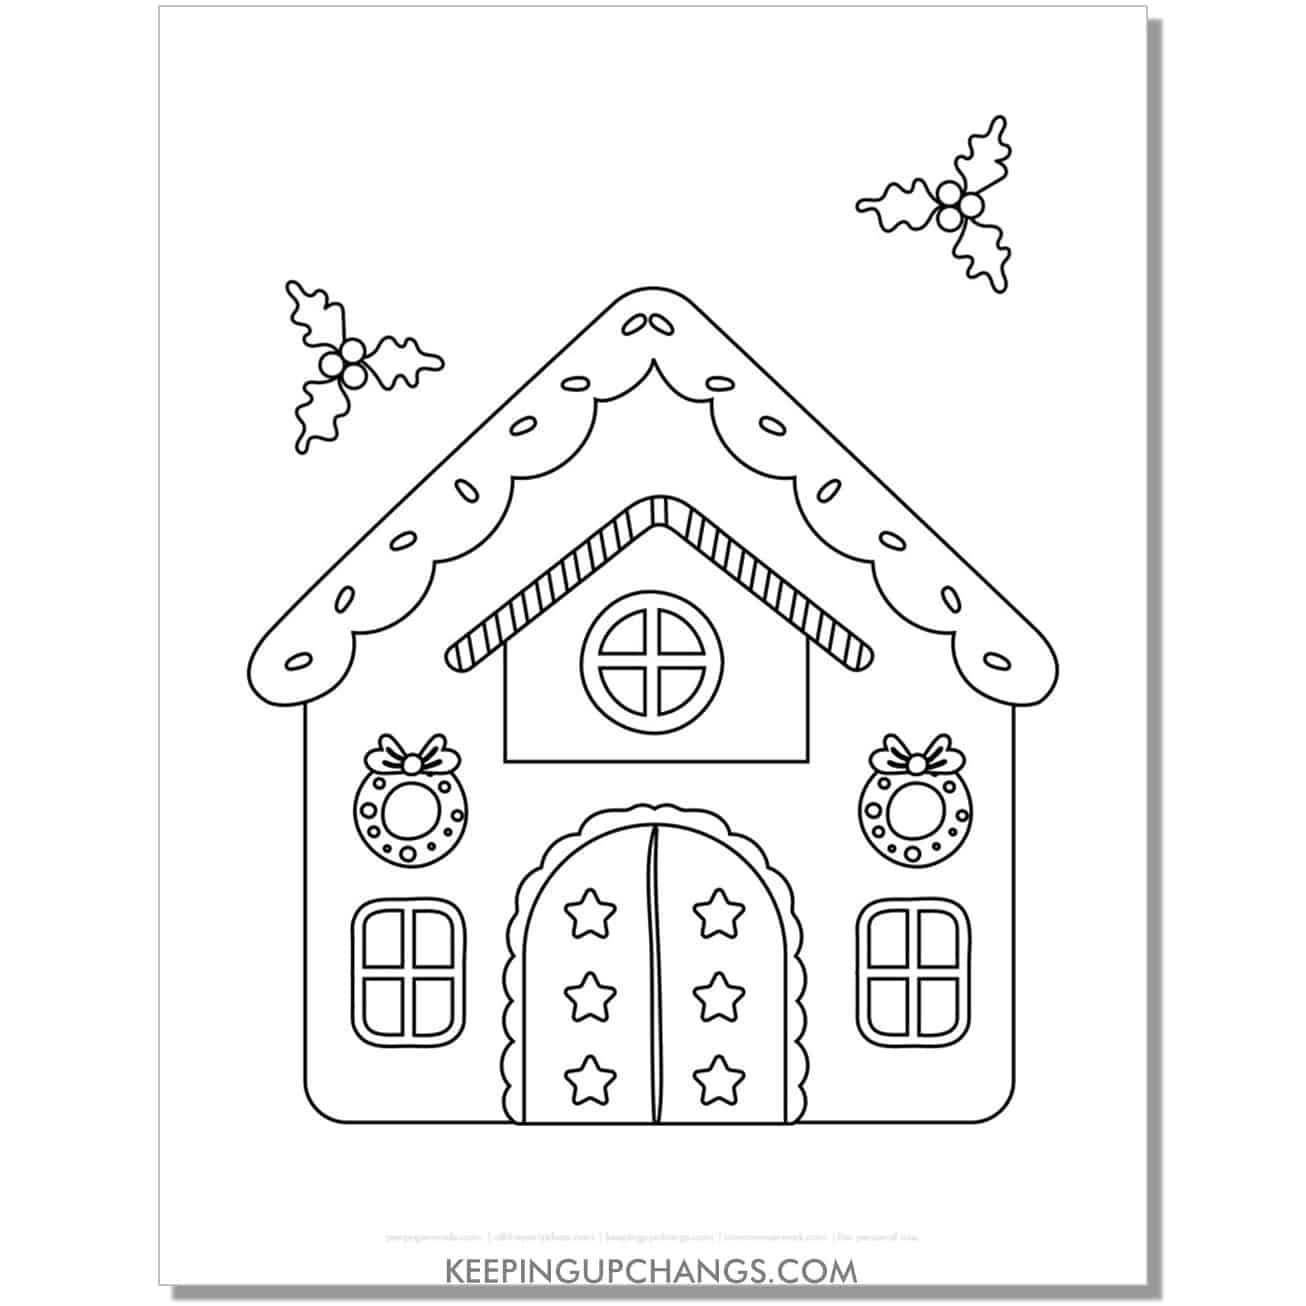 free easy gingerbread house with wreath, stars, mistletoe coloring page.